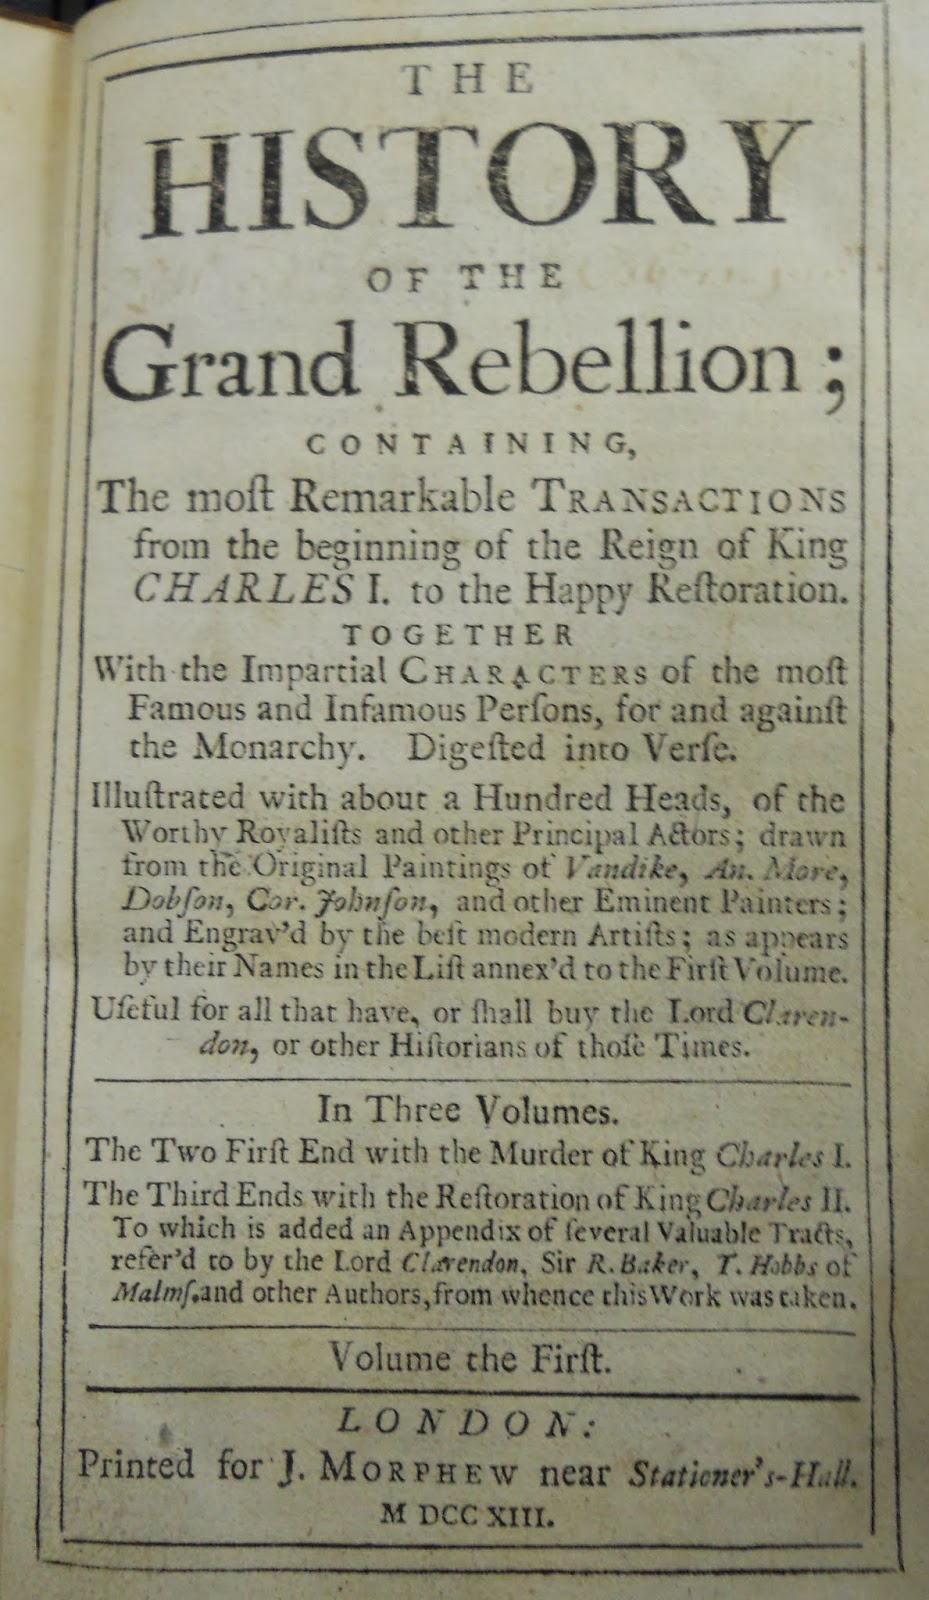 "The History of the Grand Rebellion"